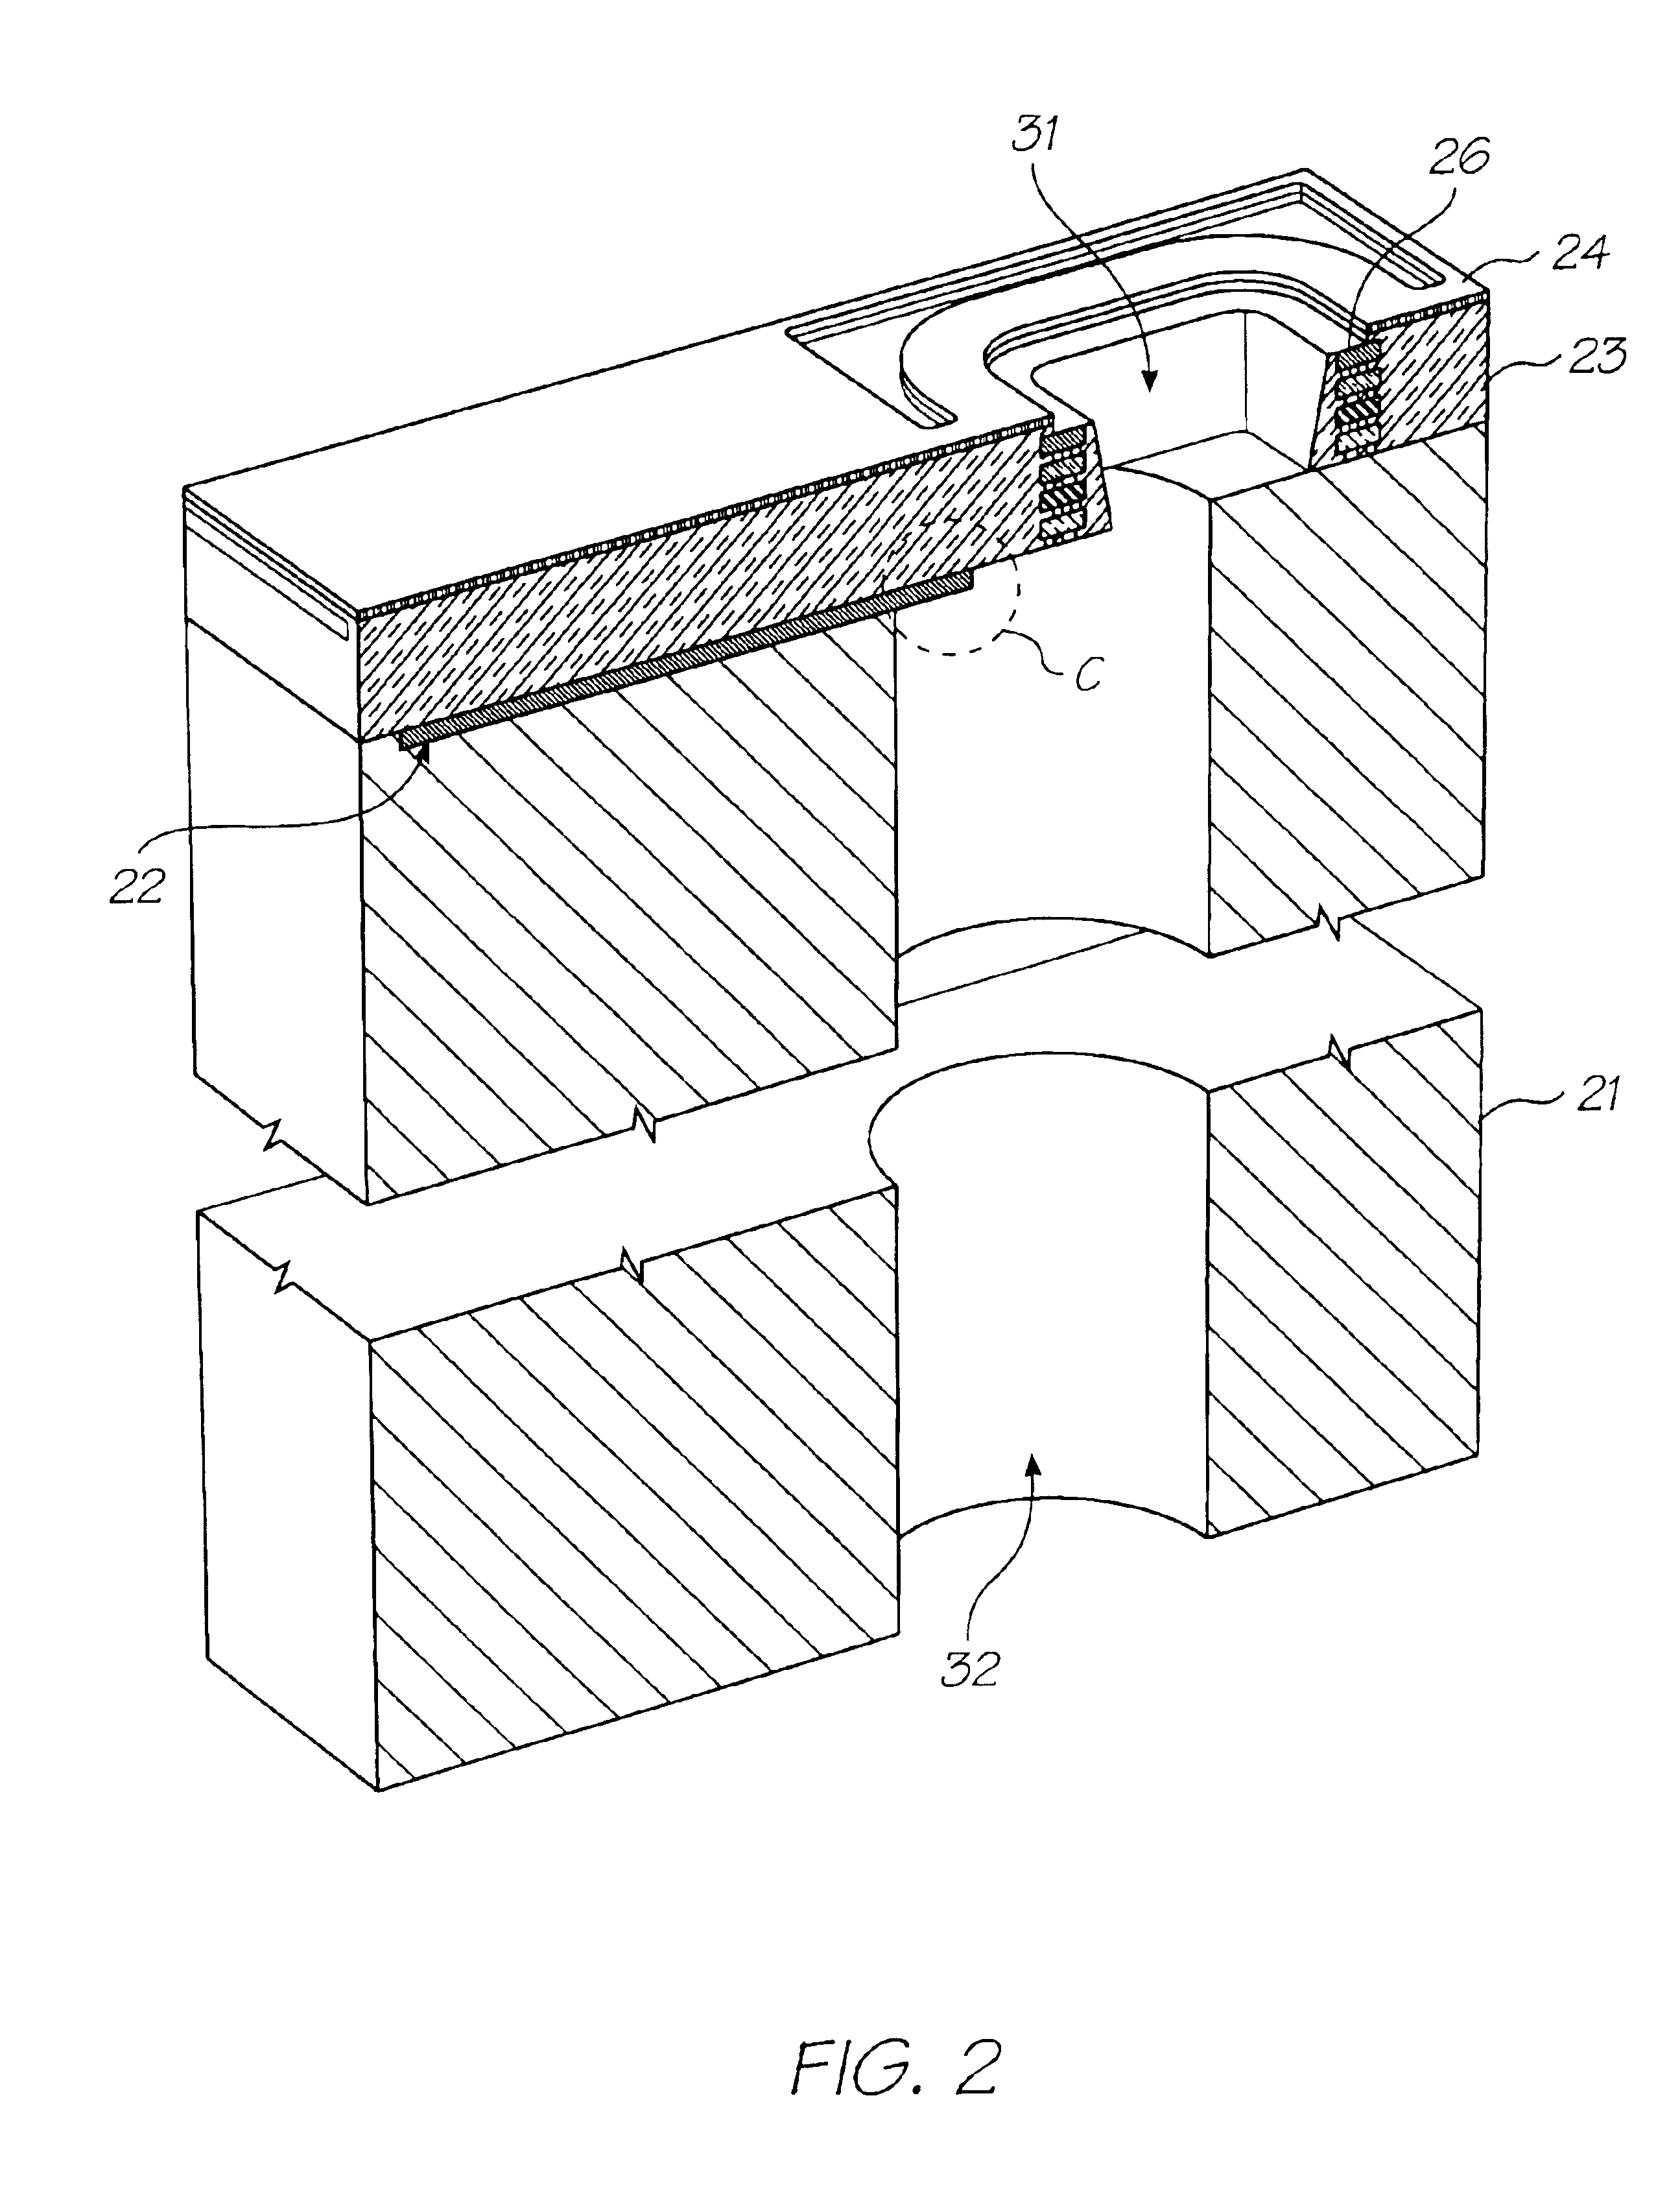 Inkjet printhead with ink supply passage formed from both sides of the wafer by overlapping etches